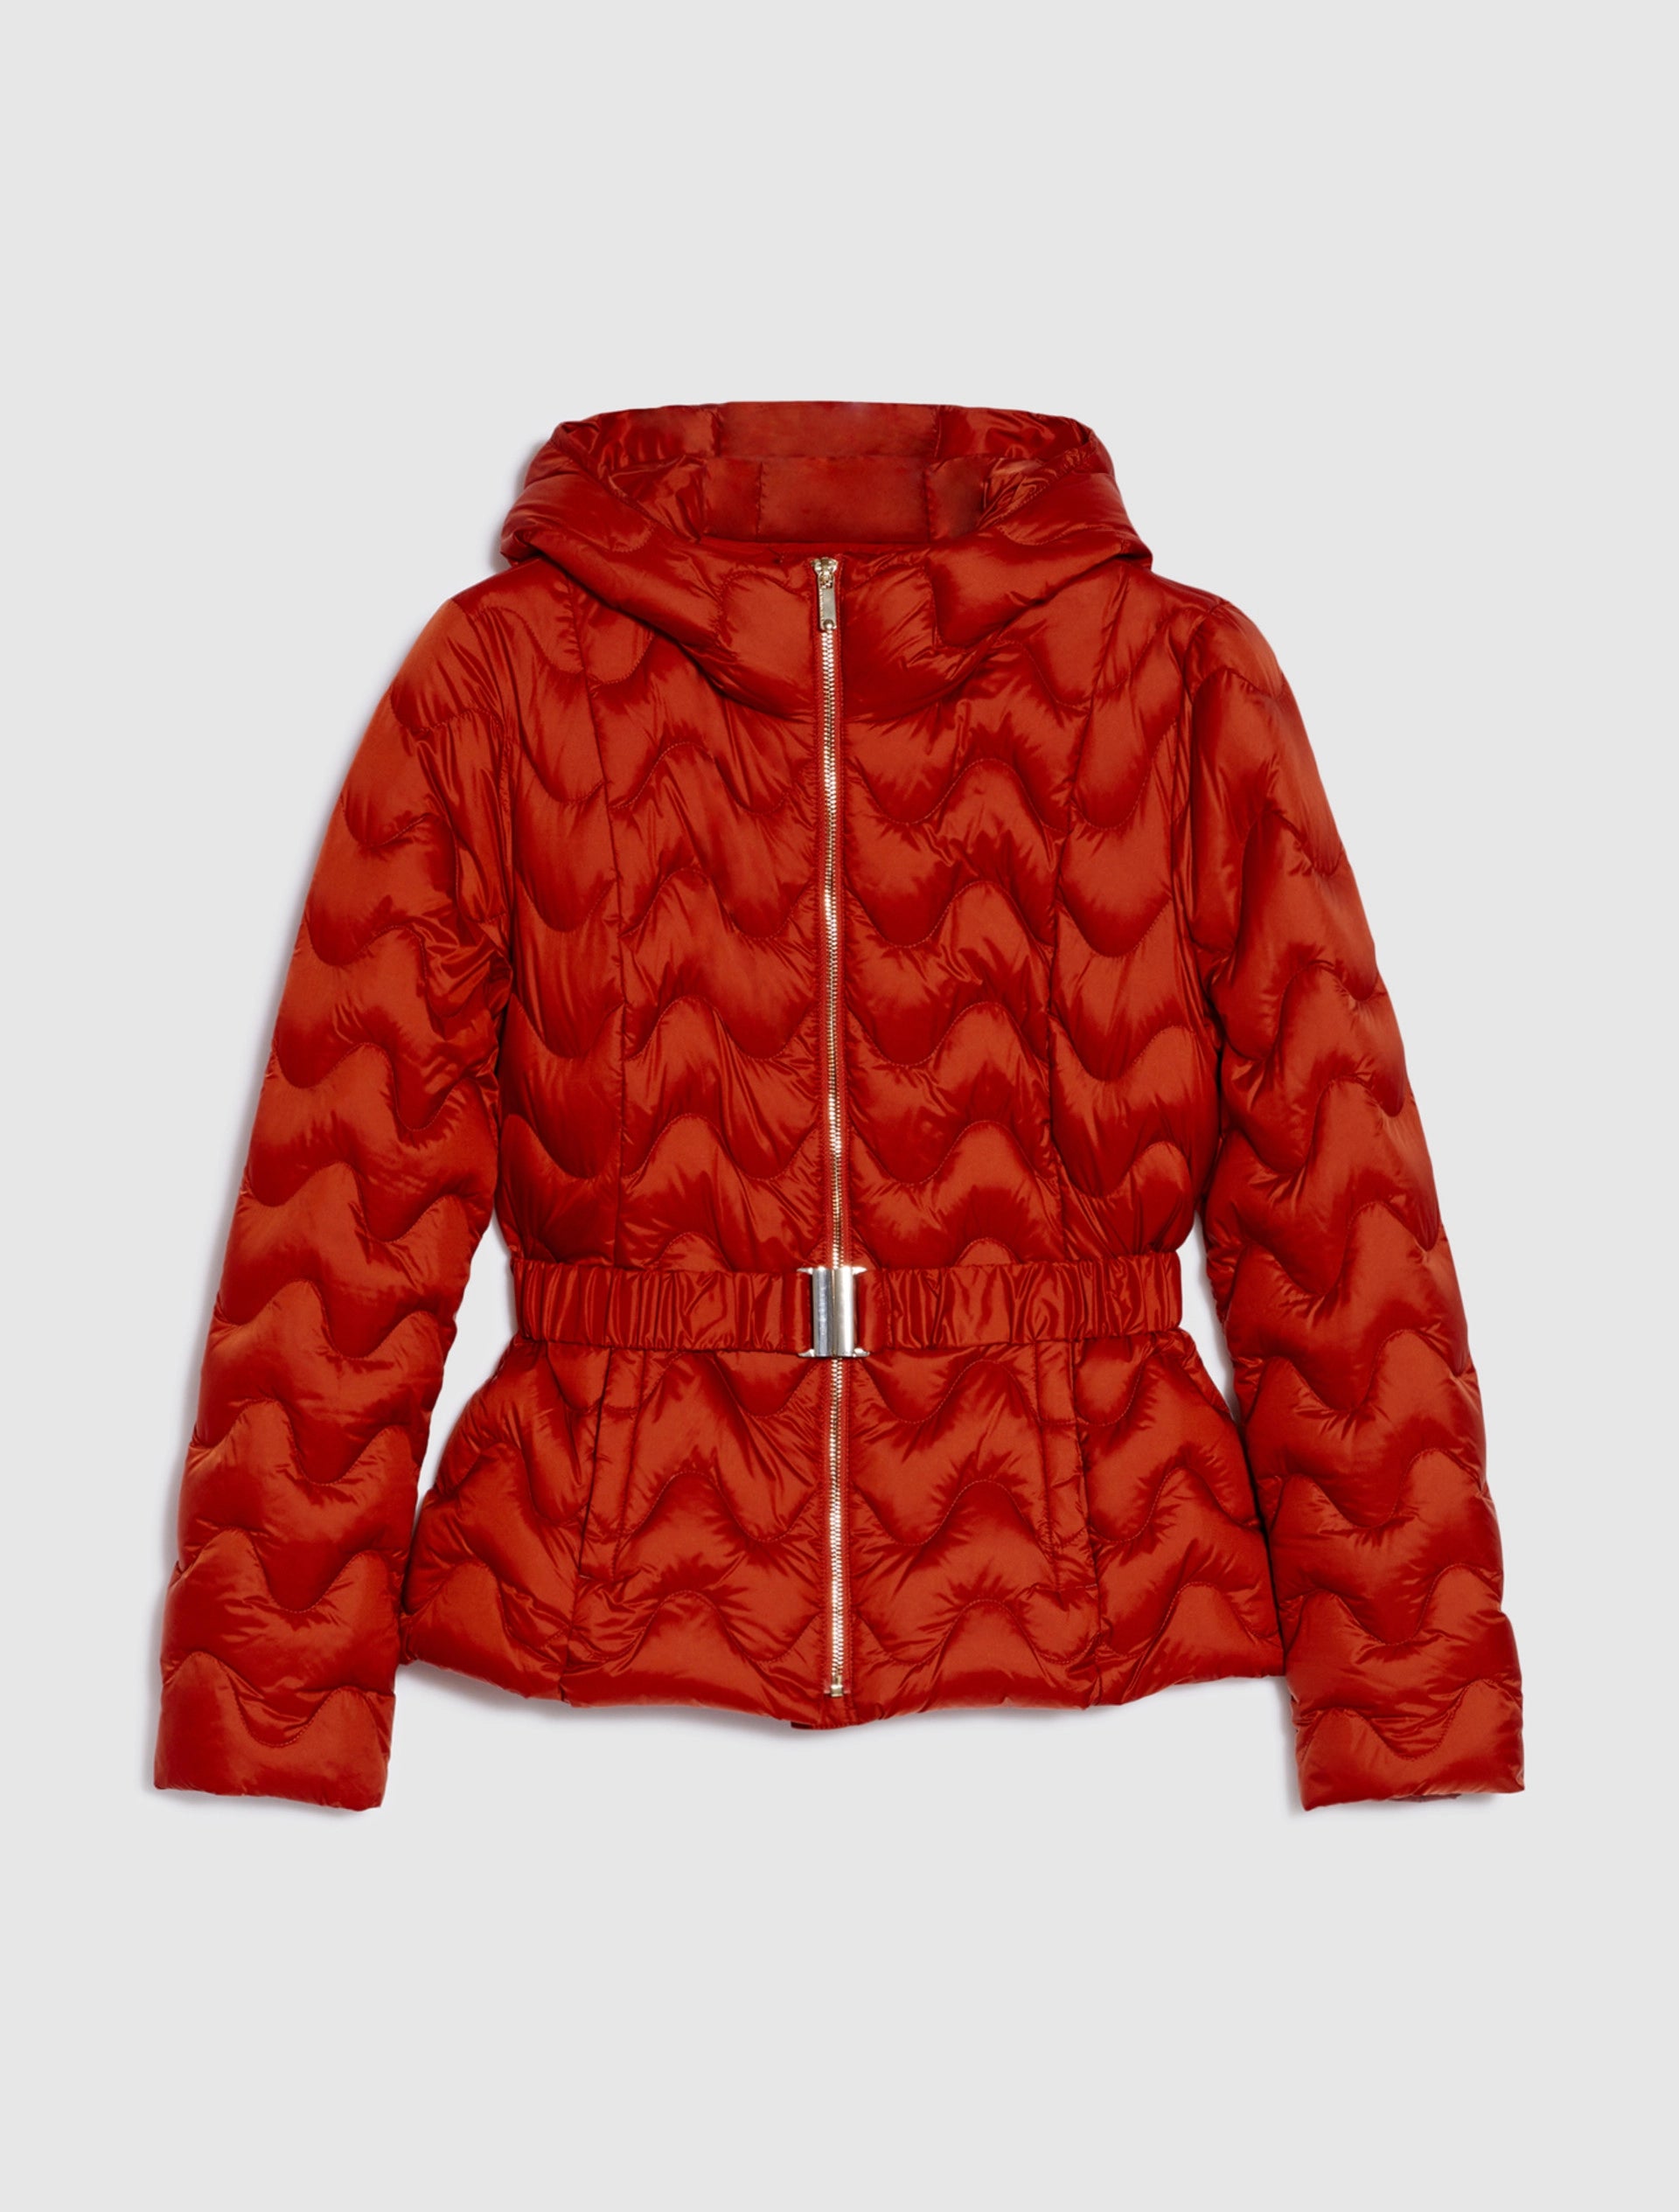 PB 0123 PESCARA Quilted jacket Terracotta